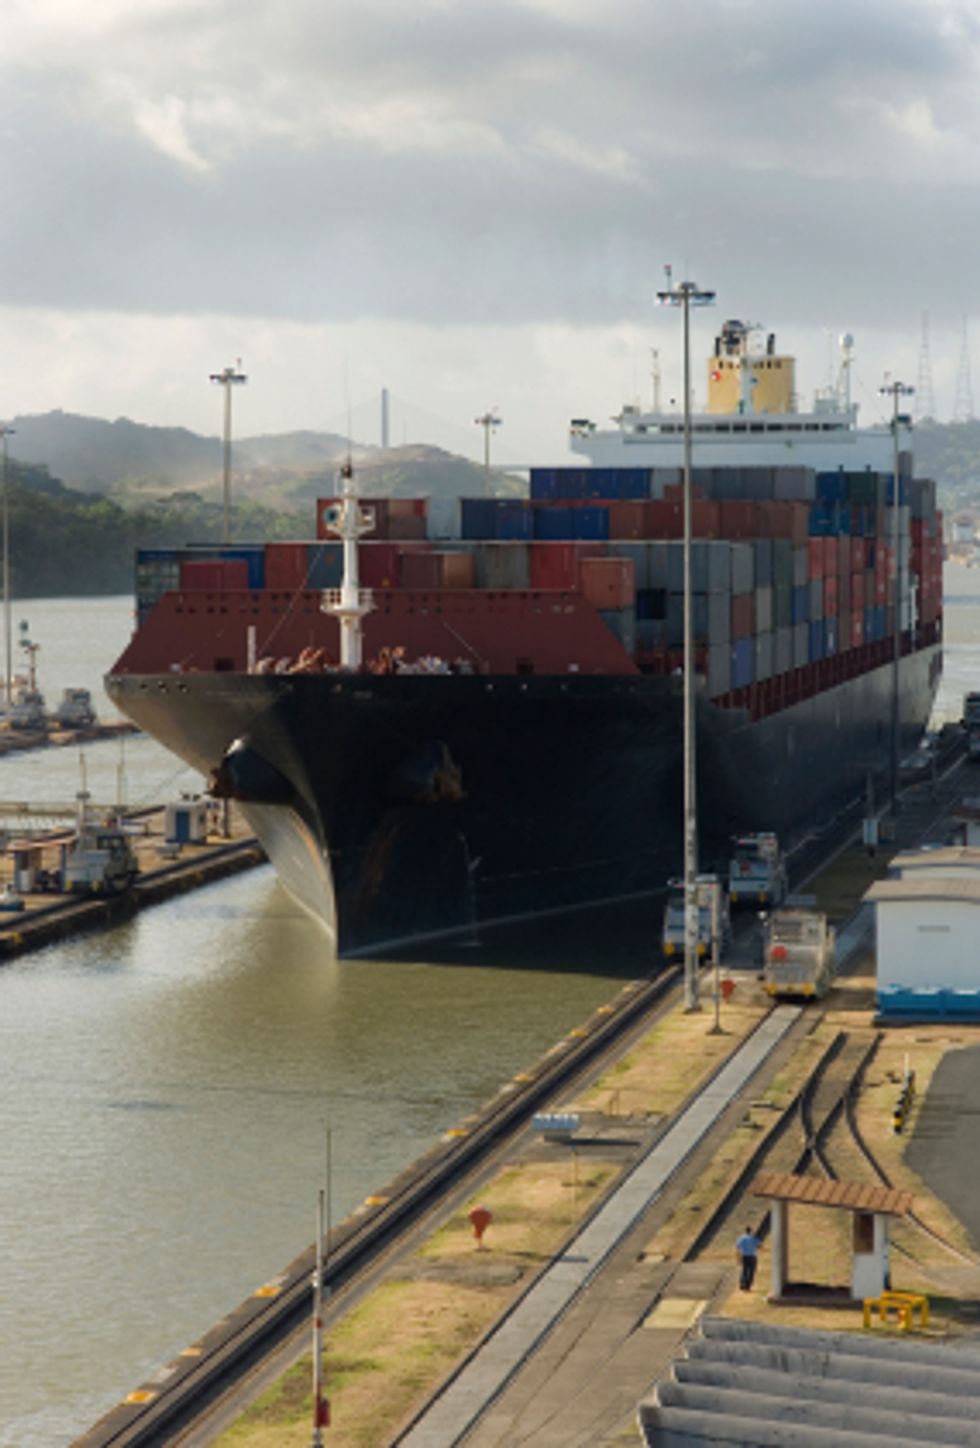 
Weather Impacts Panama Canal Capabilities
